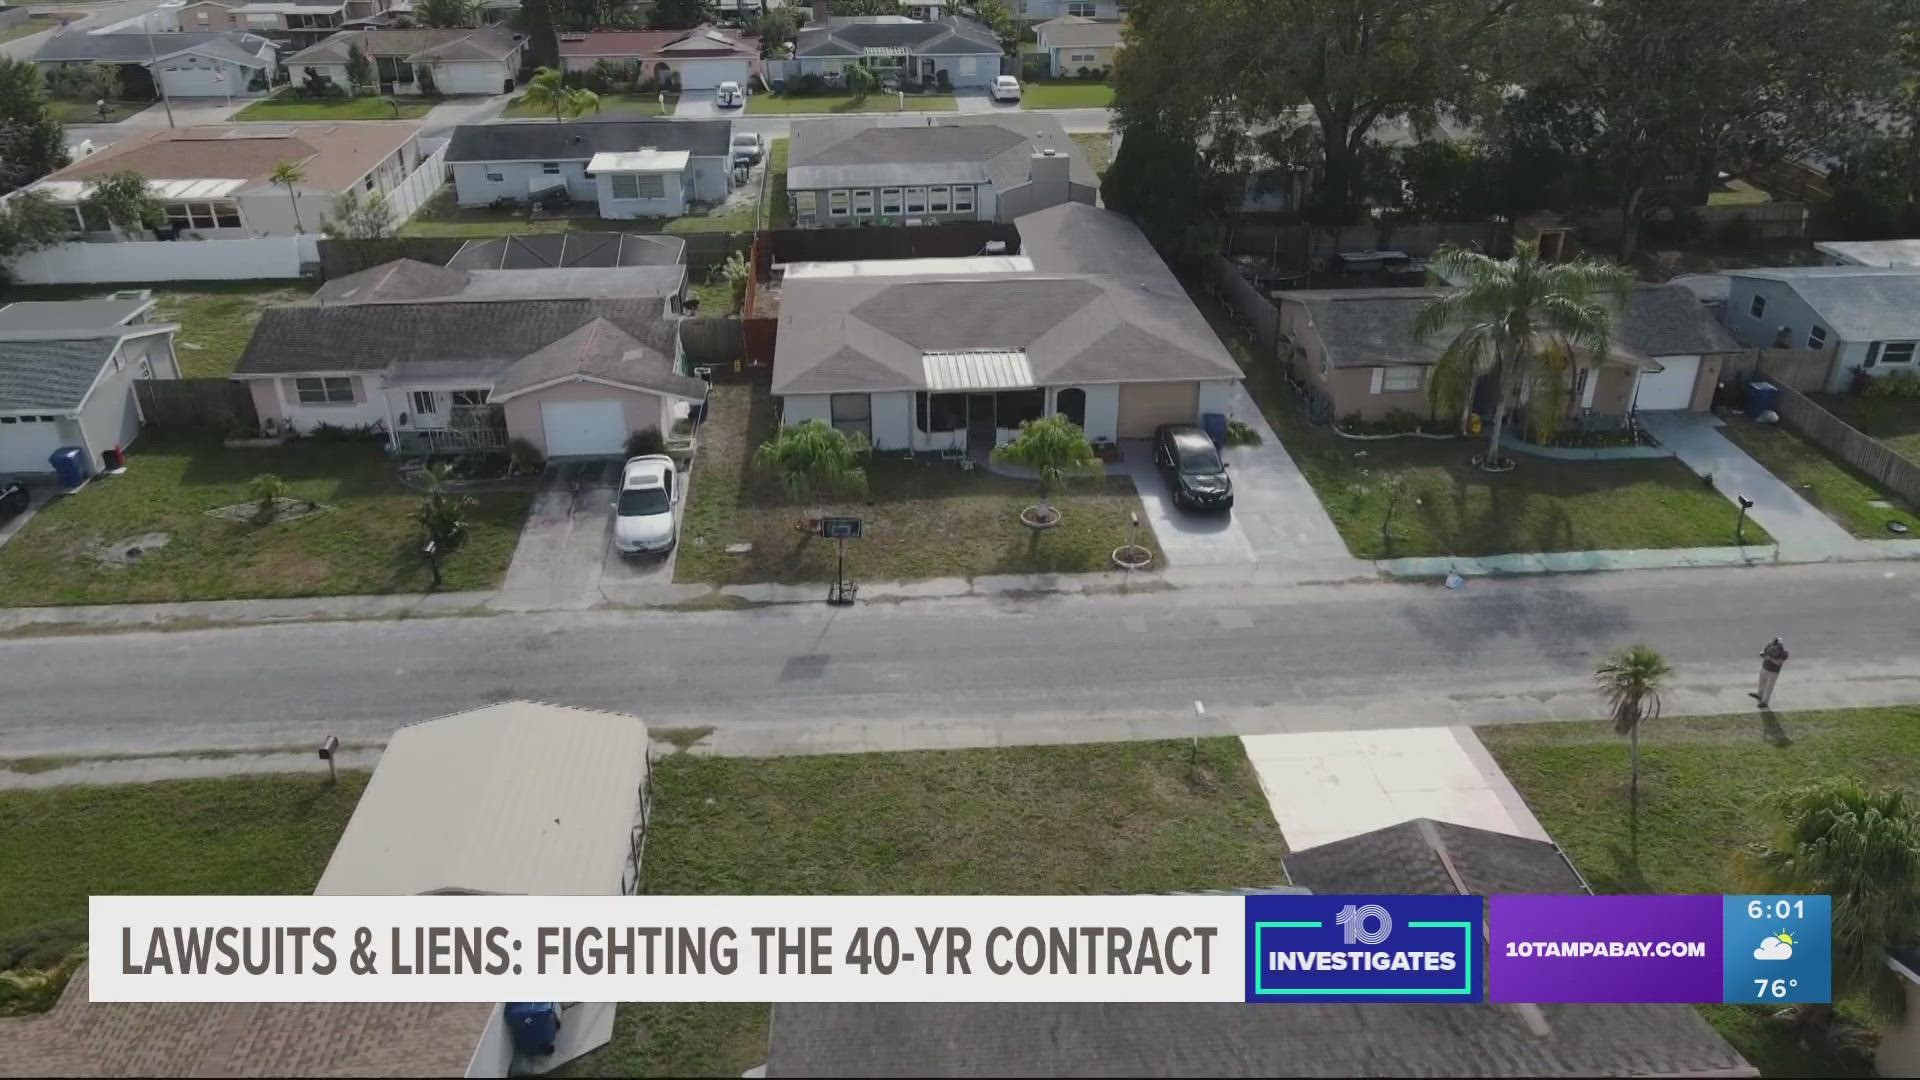 For a little cash up front, some Tampa Bay-area homeowners find themselves bound to 40-year agreements that operate like liens and costs thousands to escape.